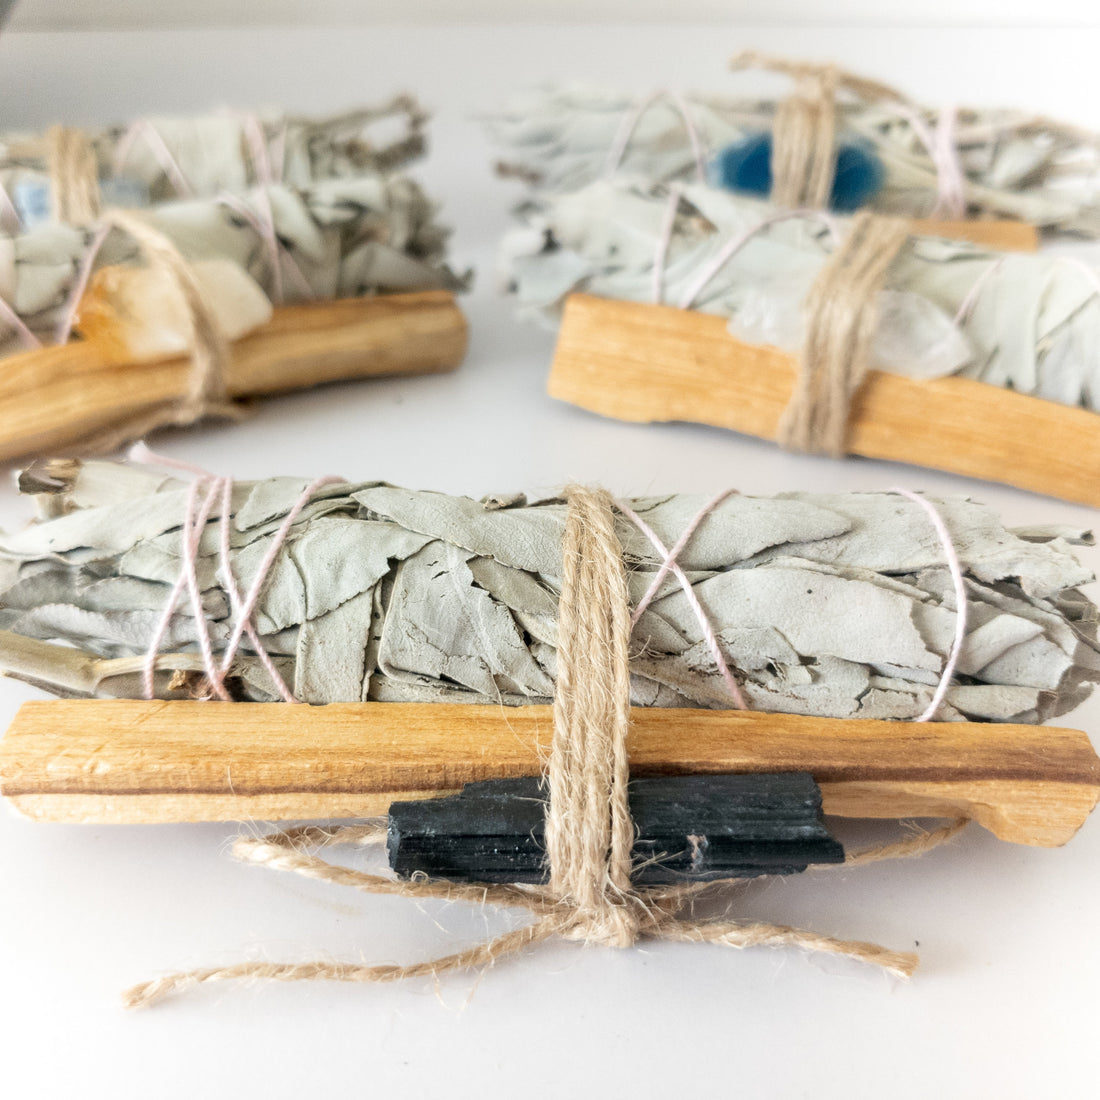 Sage Smudging Kit… we need to smudge the heck out of life right now.